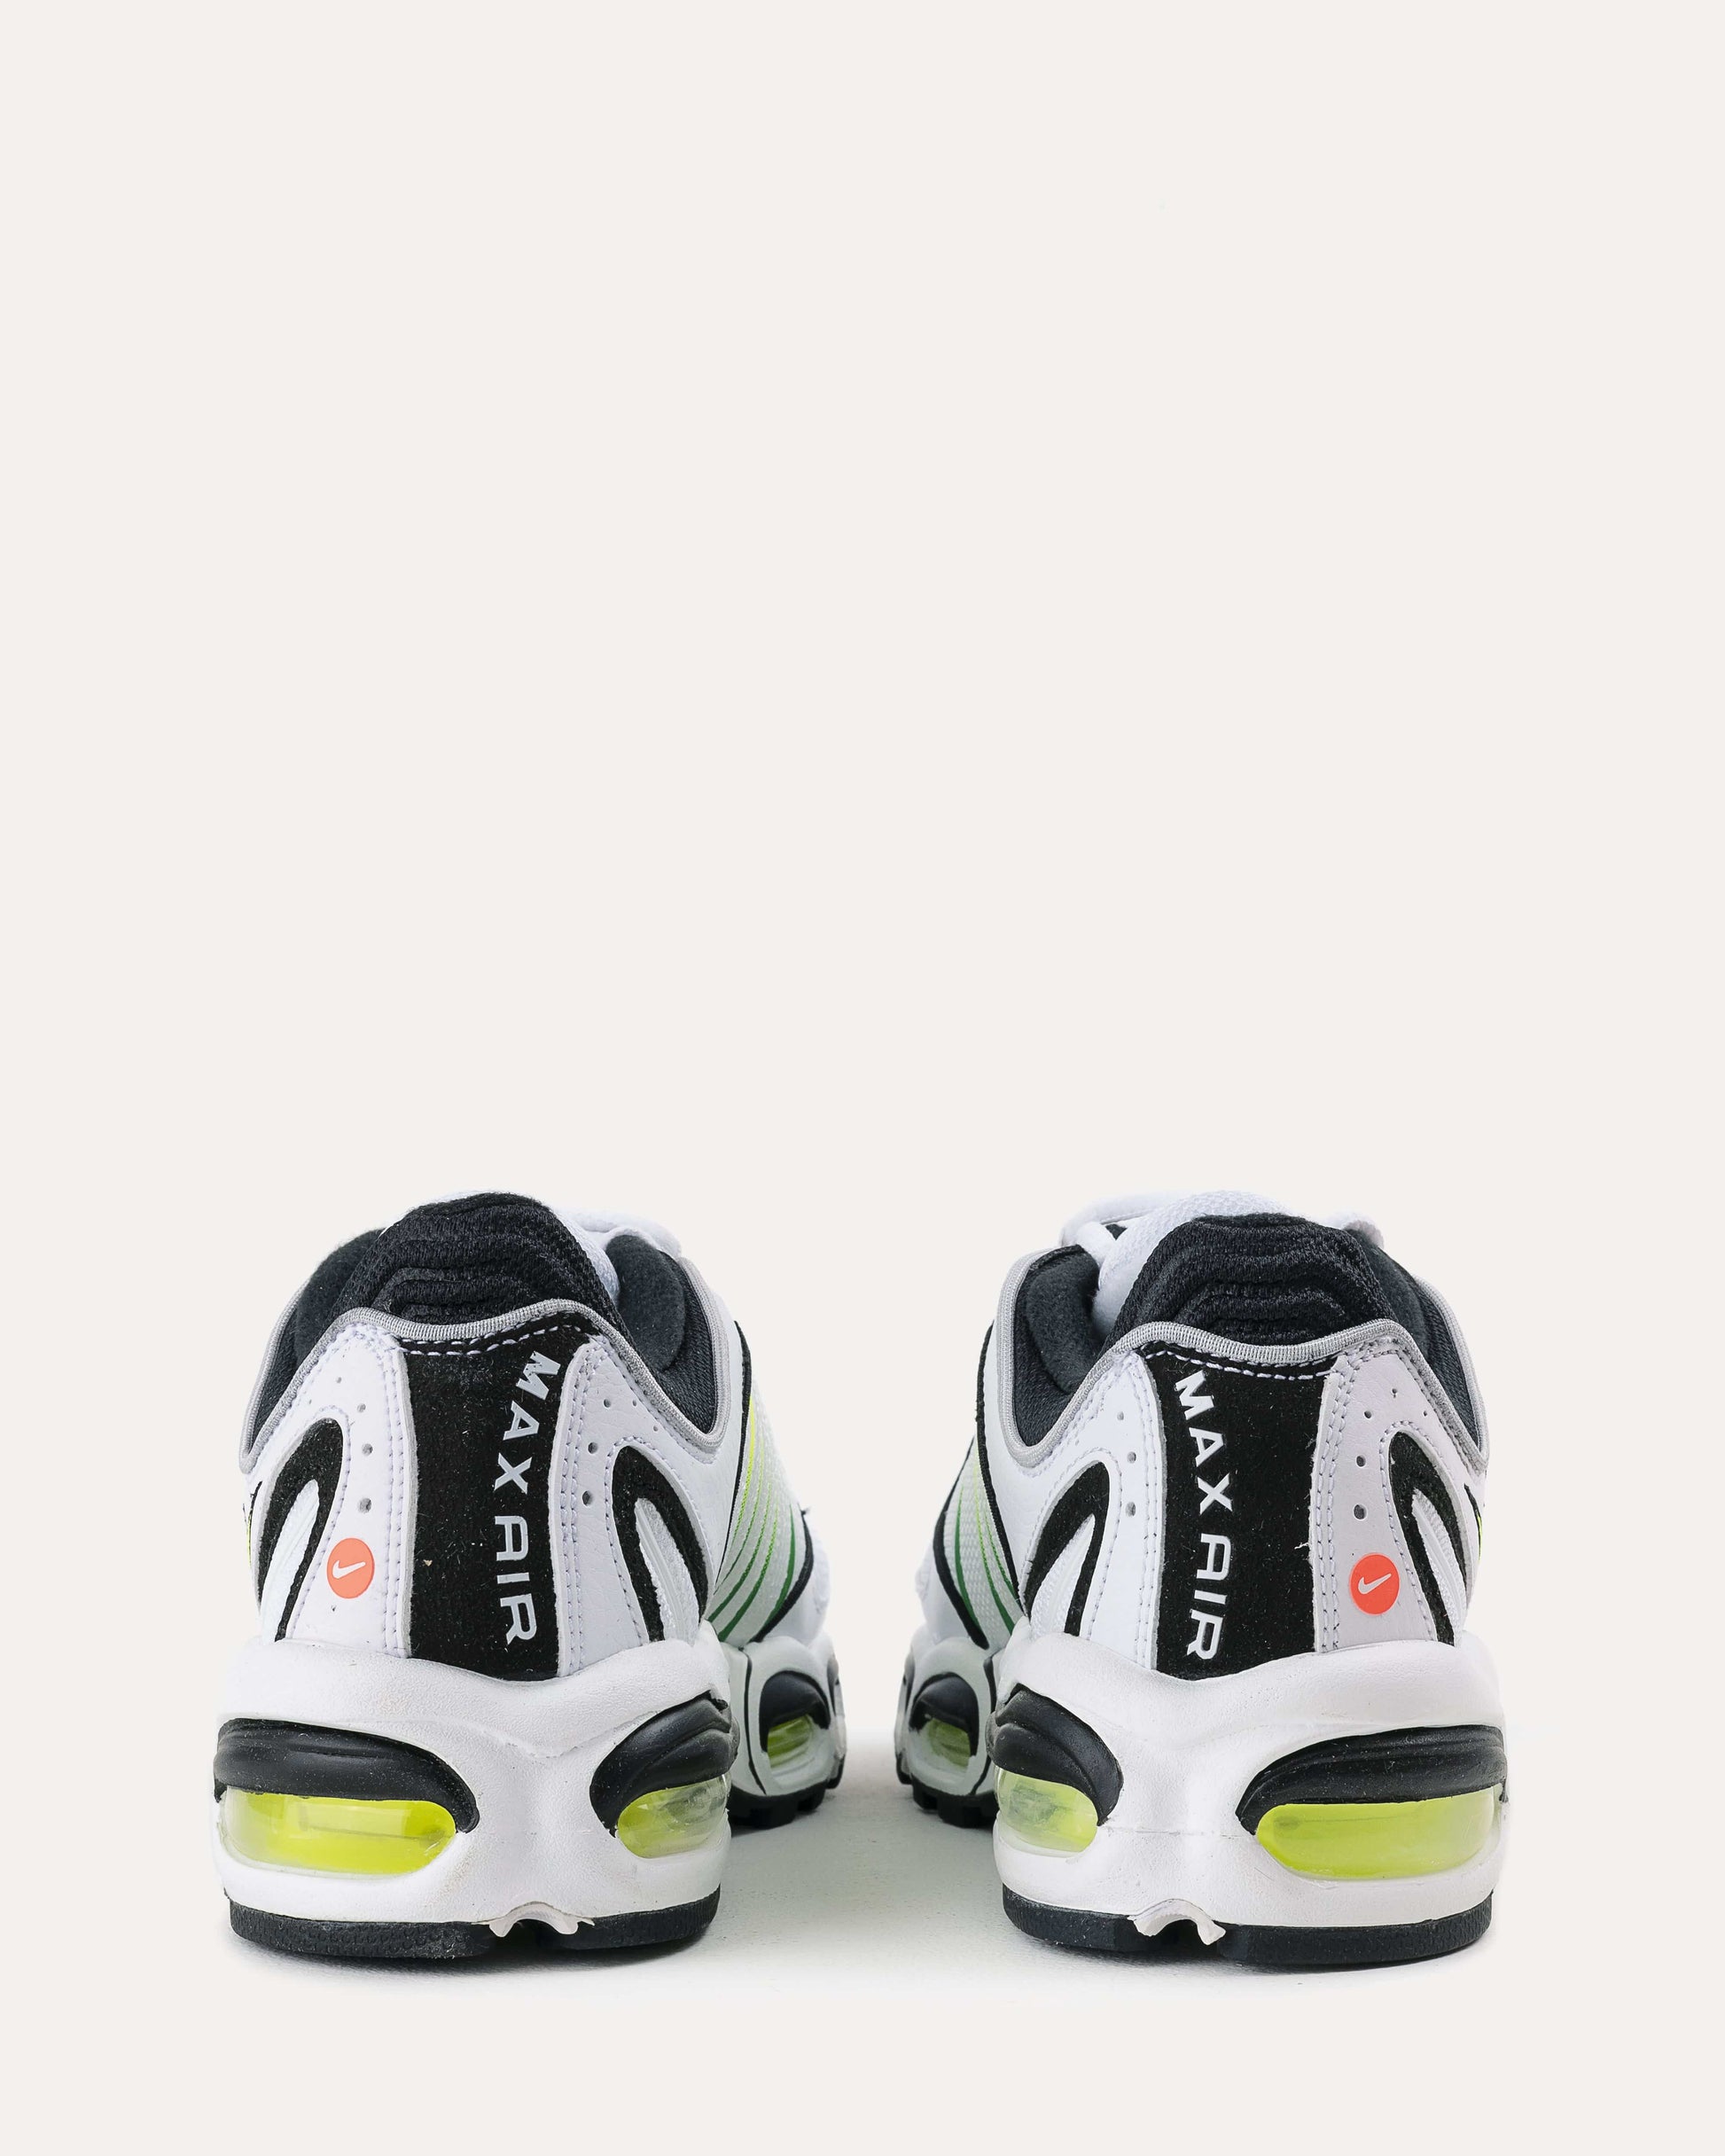 Nike Unisex Air Max Tailwind IV in Volt